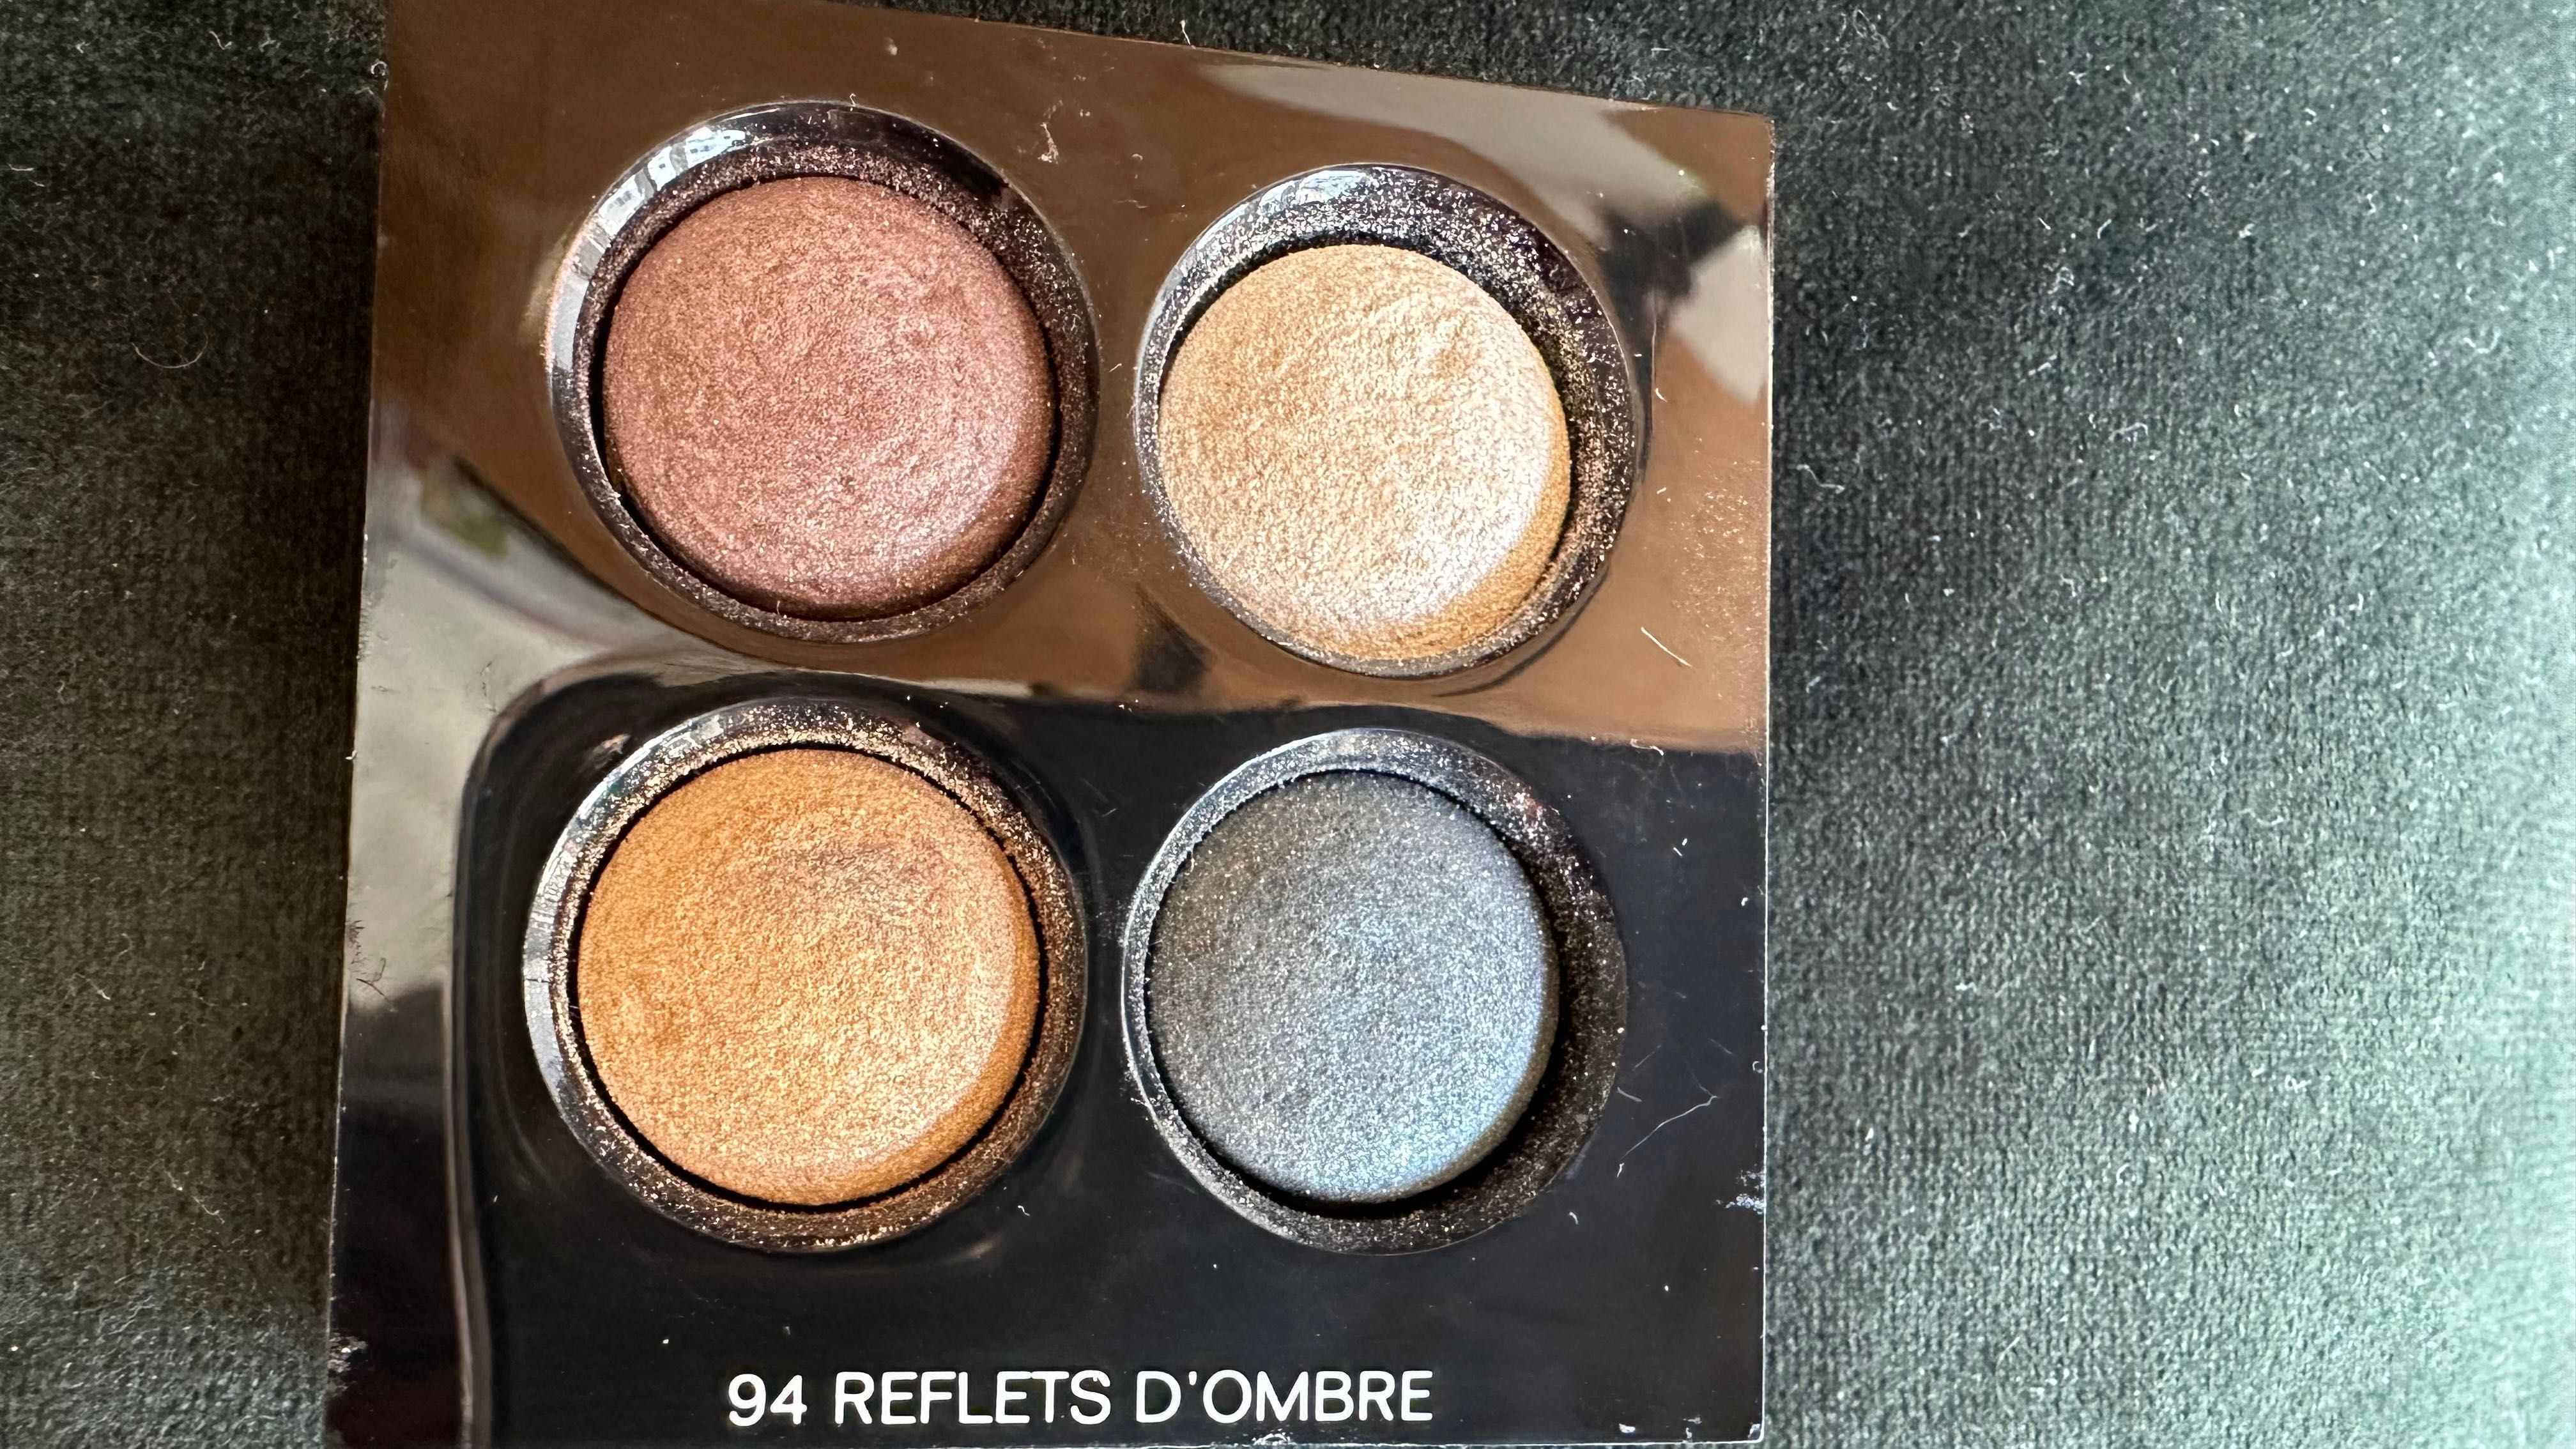 Chanel 94 Reflets D'ombre les 4 ombres